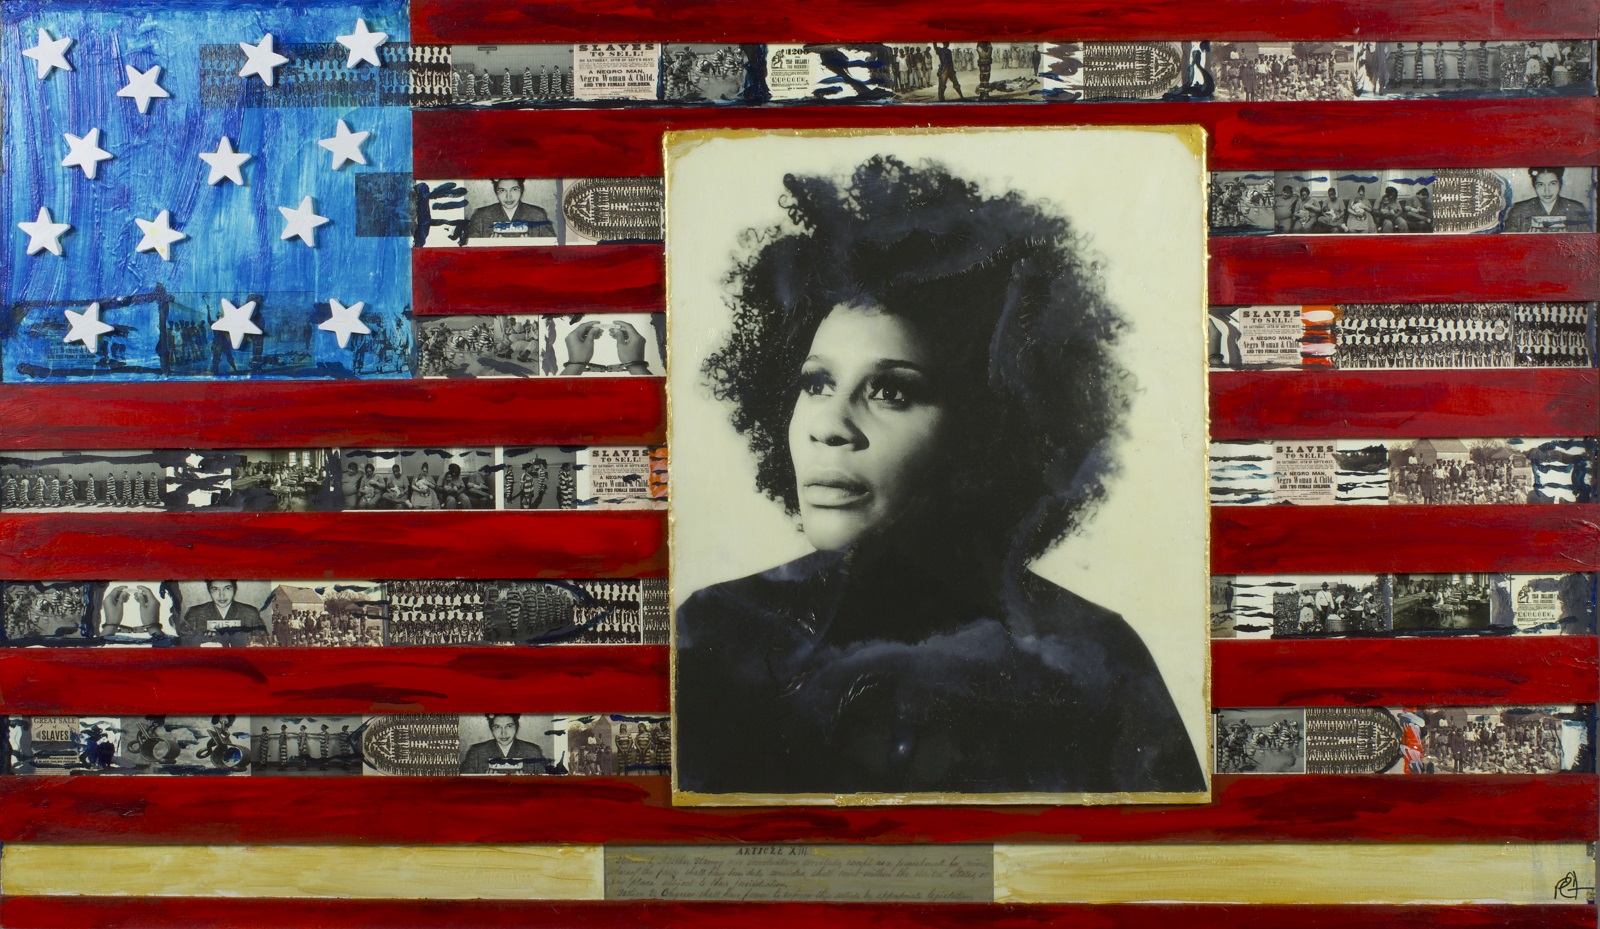 American falg with a vintage photo of a woman with a black shirt and an afro hairstly e